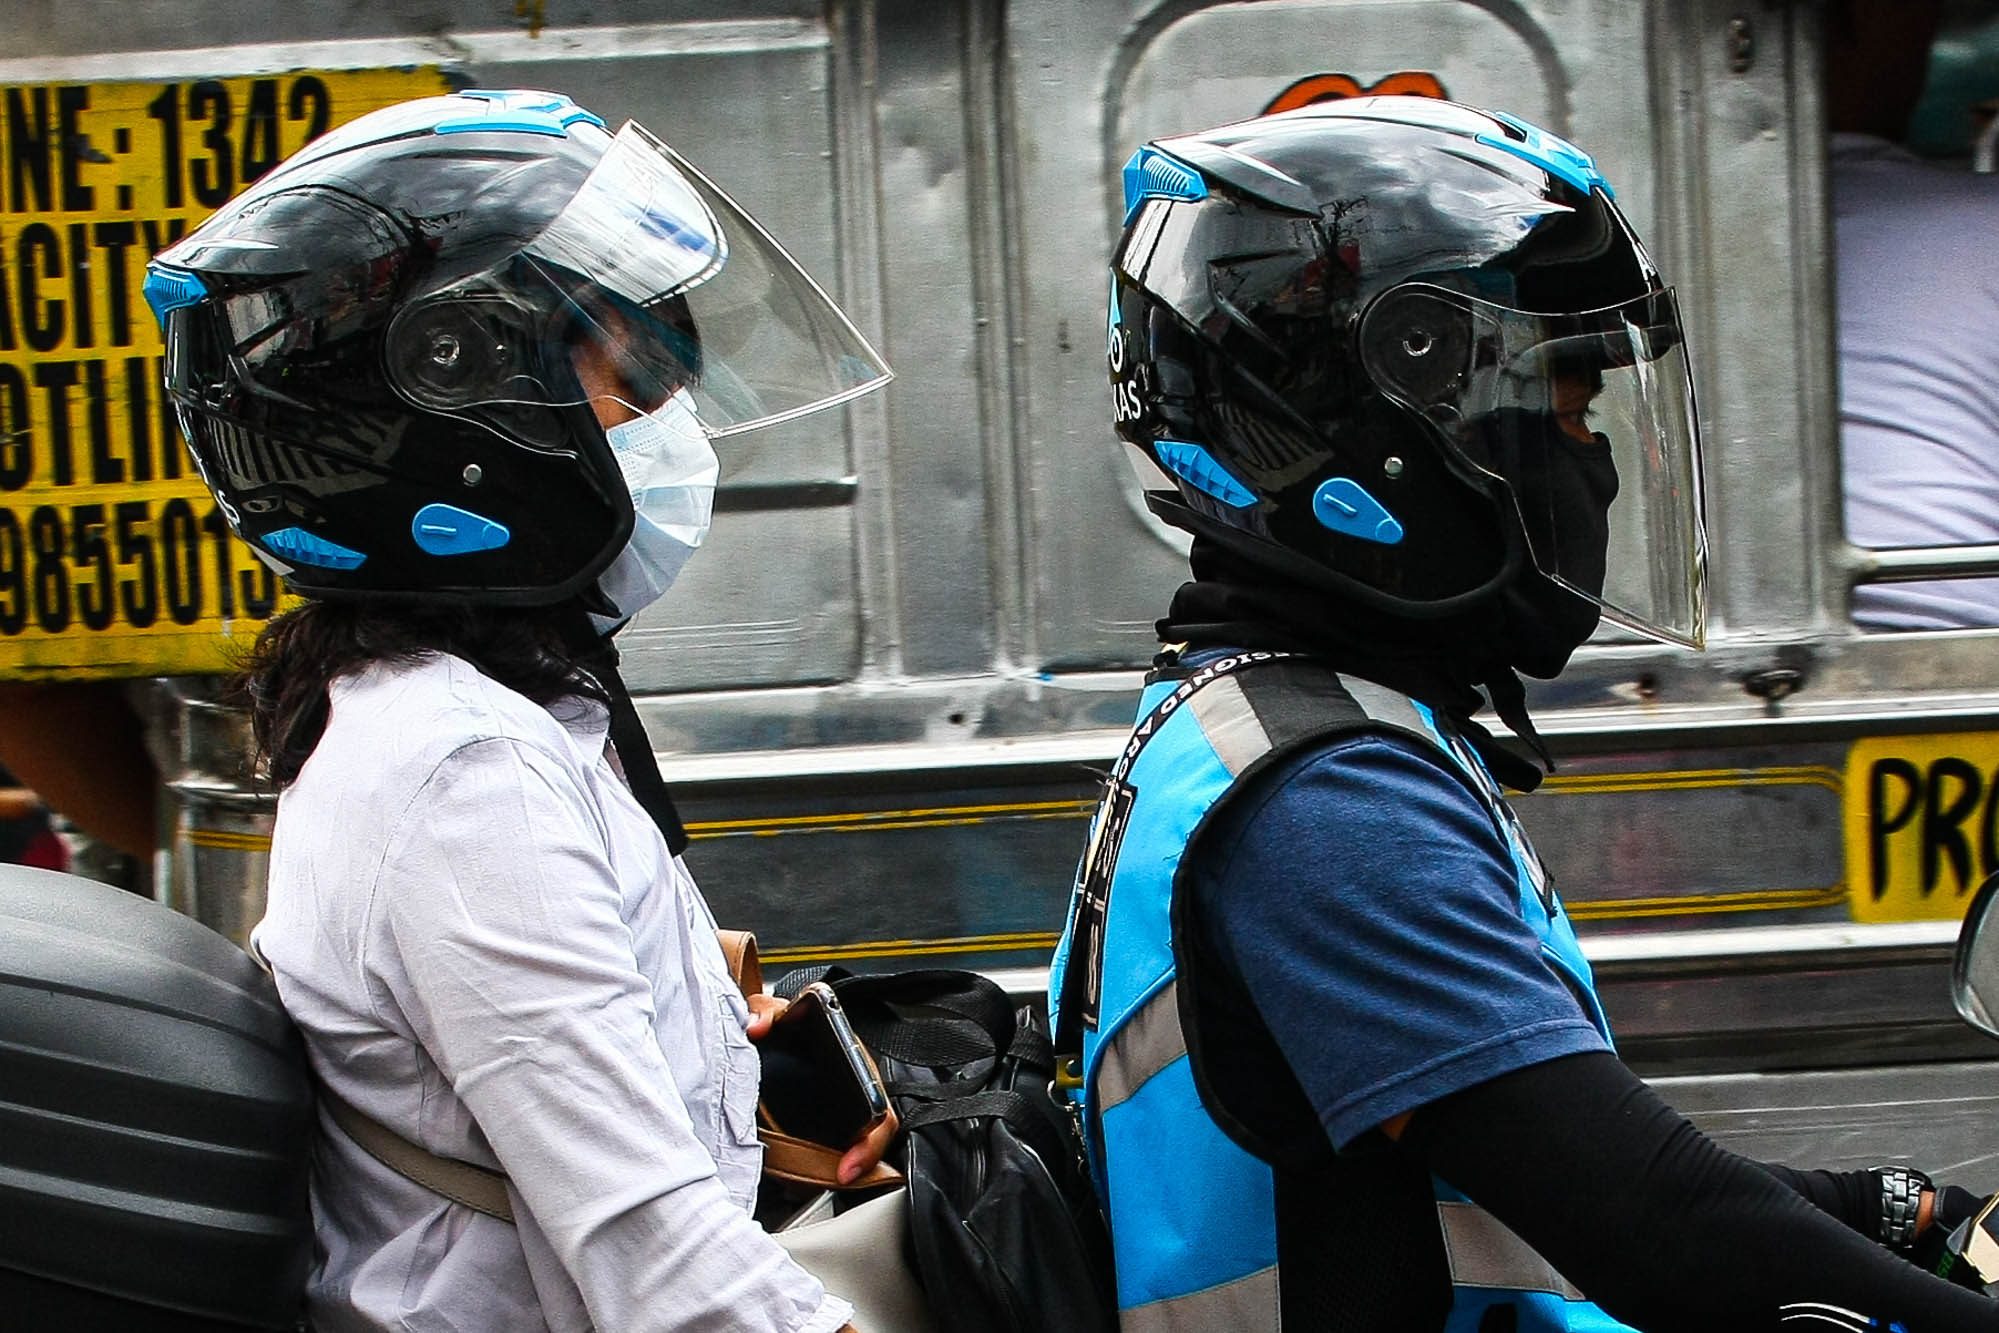 16 senators sign report legalizing motorcycle taxis